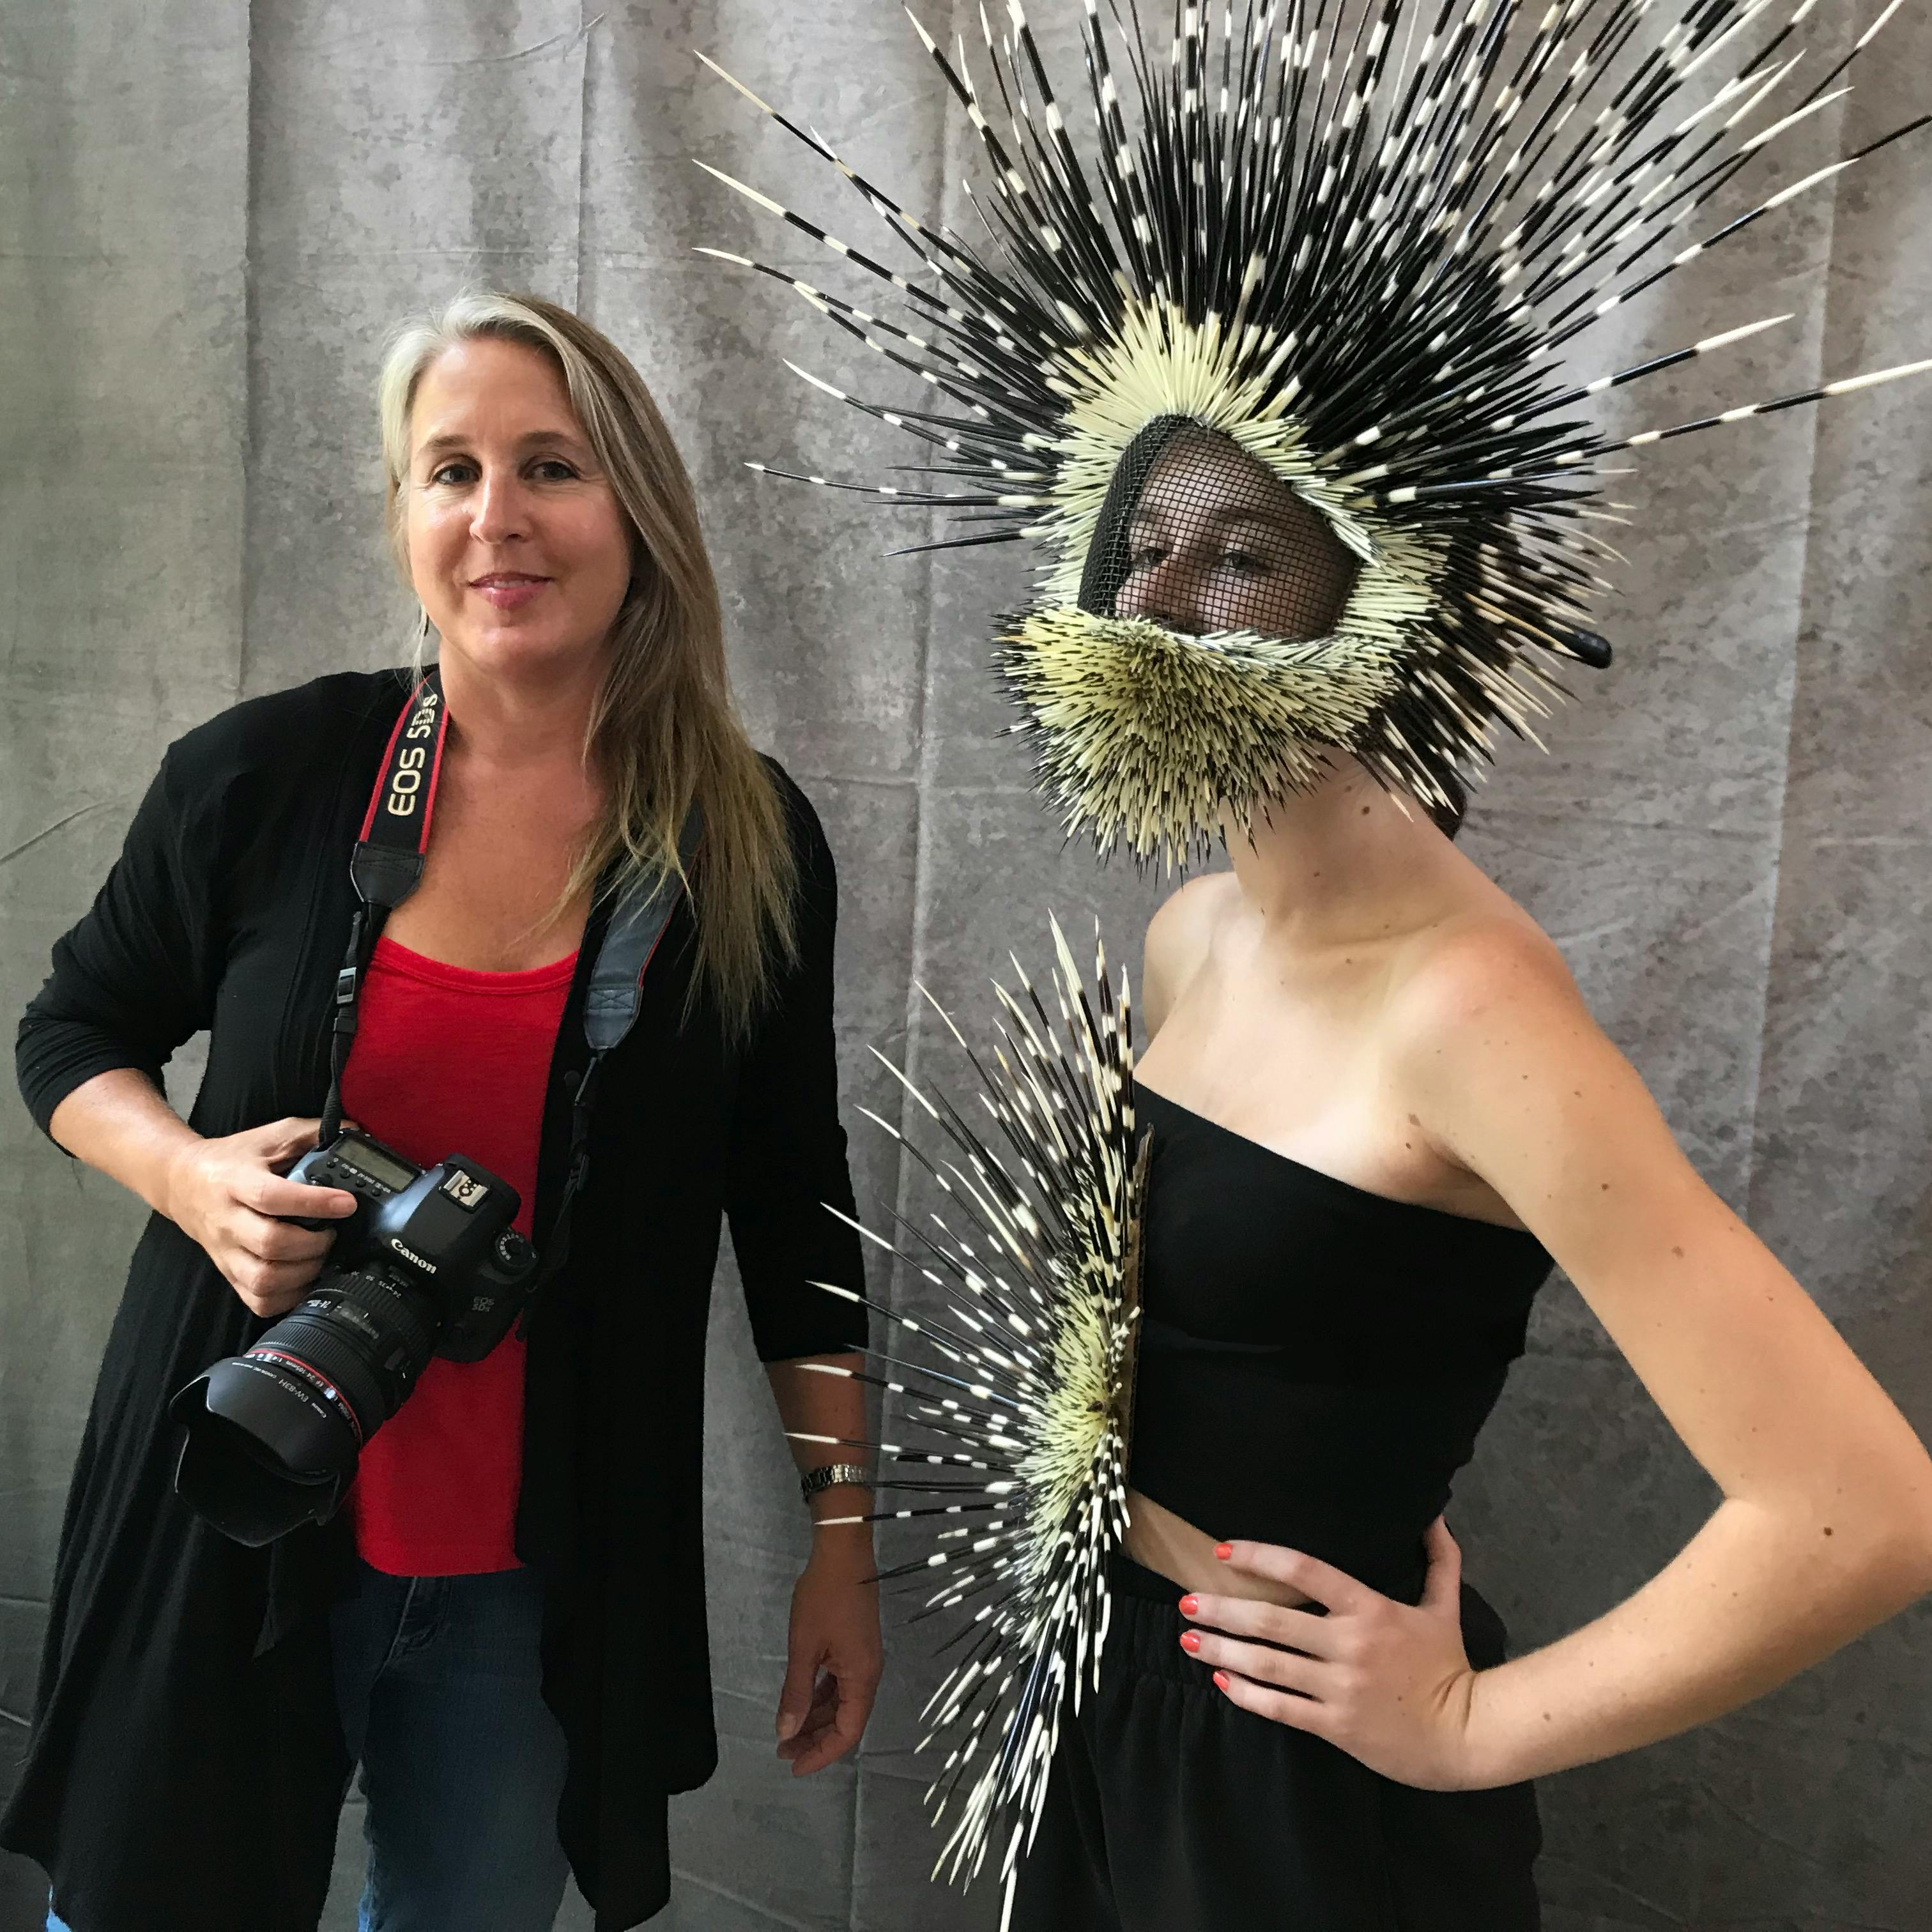 photographer with camera standing beside model wearing a helmet and shirt adorned with porcupine quills